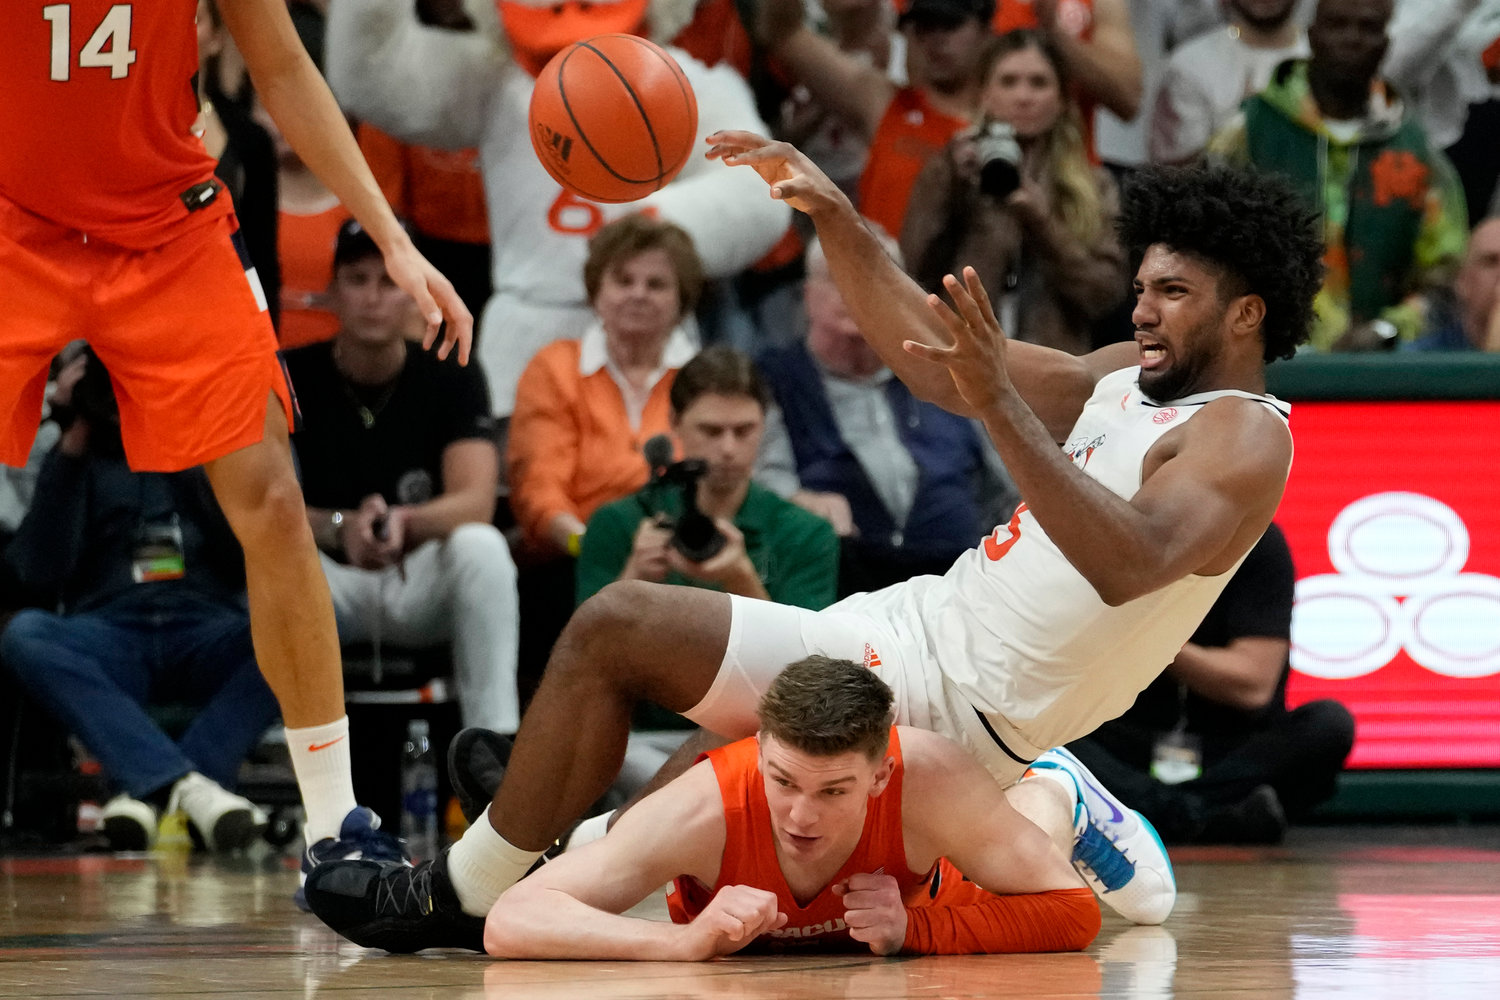 Syracuse guard Justin Taylor, bottom, falls to the court as Miami forward Norchad Omier passes the ball during the second half of Monday night's game in Coral Gables, Fla.